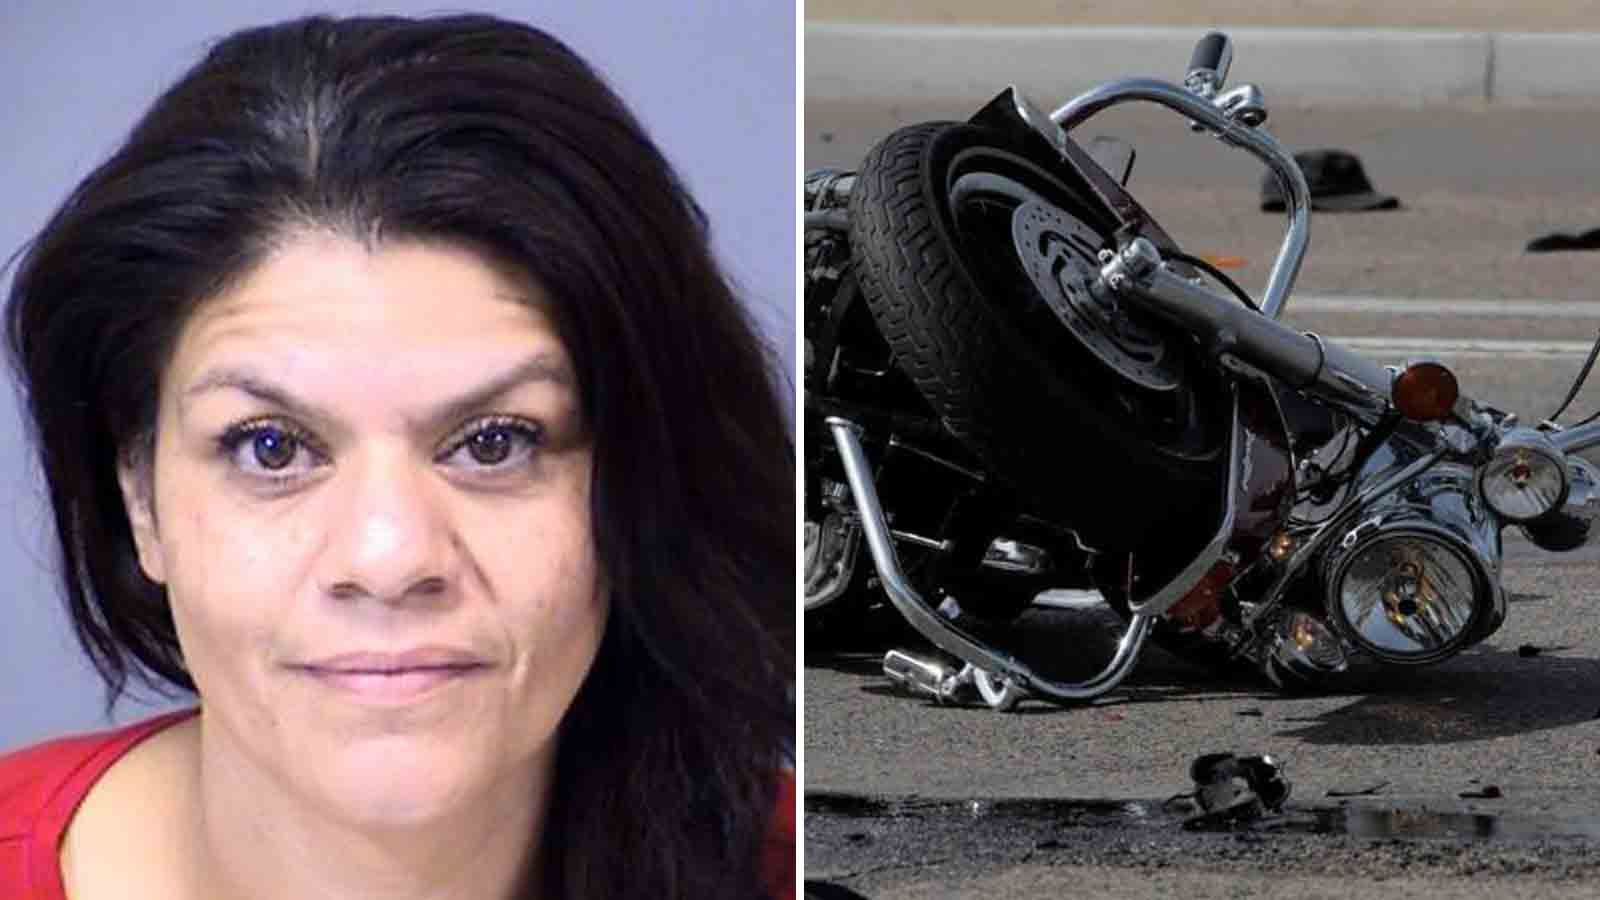 A woman believed to be under the influence of drugs was arrested after a fatal crash with a motorcy...